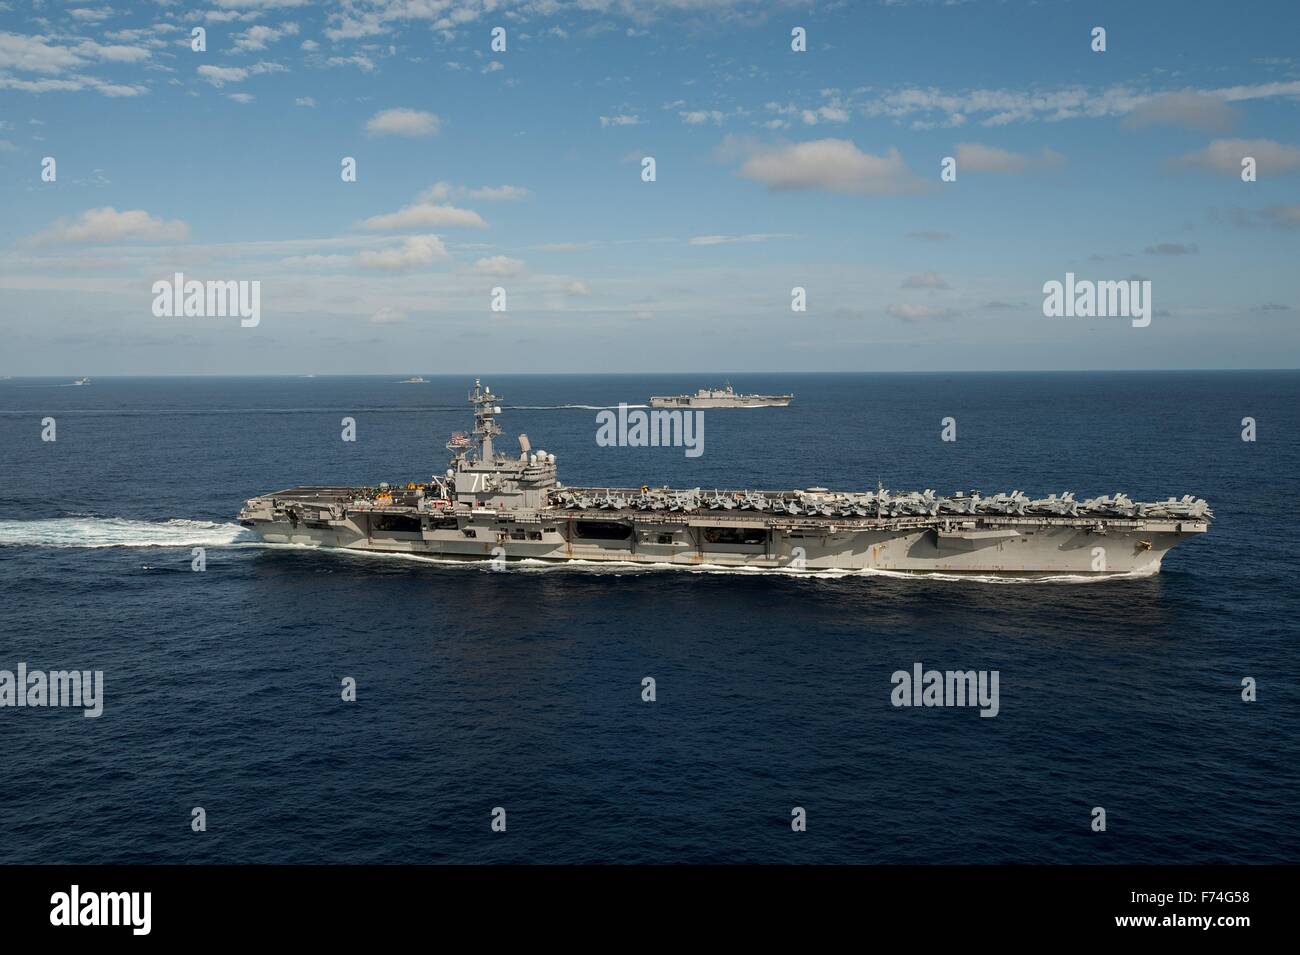 US Navy Nimitz-class aircraft carrier USS Ronald Reagan is underway in formation with Japan Maritime Self-Defense Force ships during Annual Exercise 16 November 23, 2015 off the coast of Japan. Stock Photo